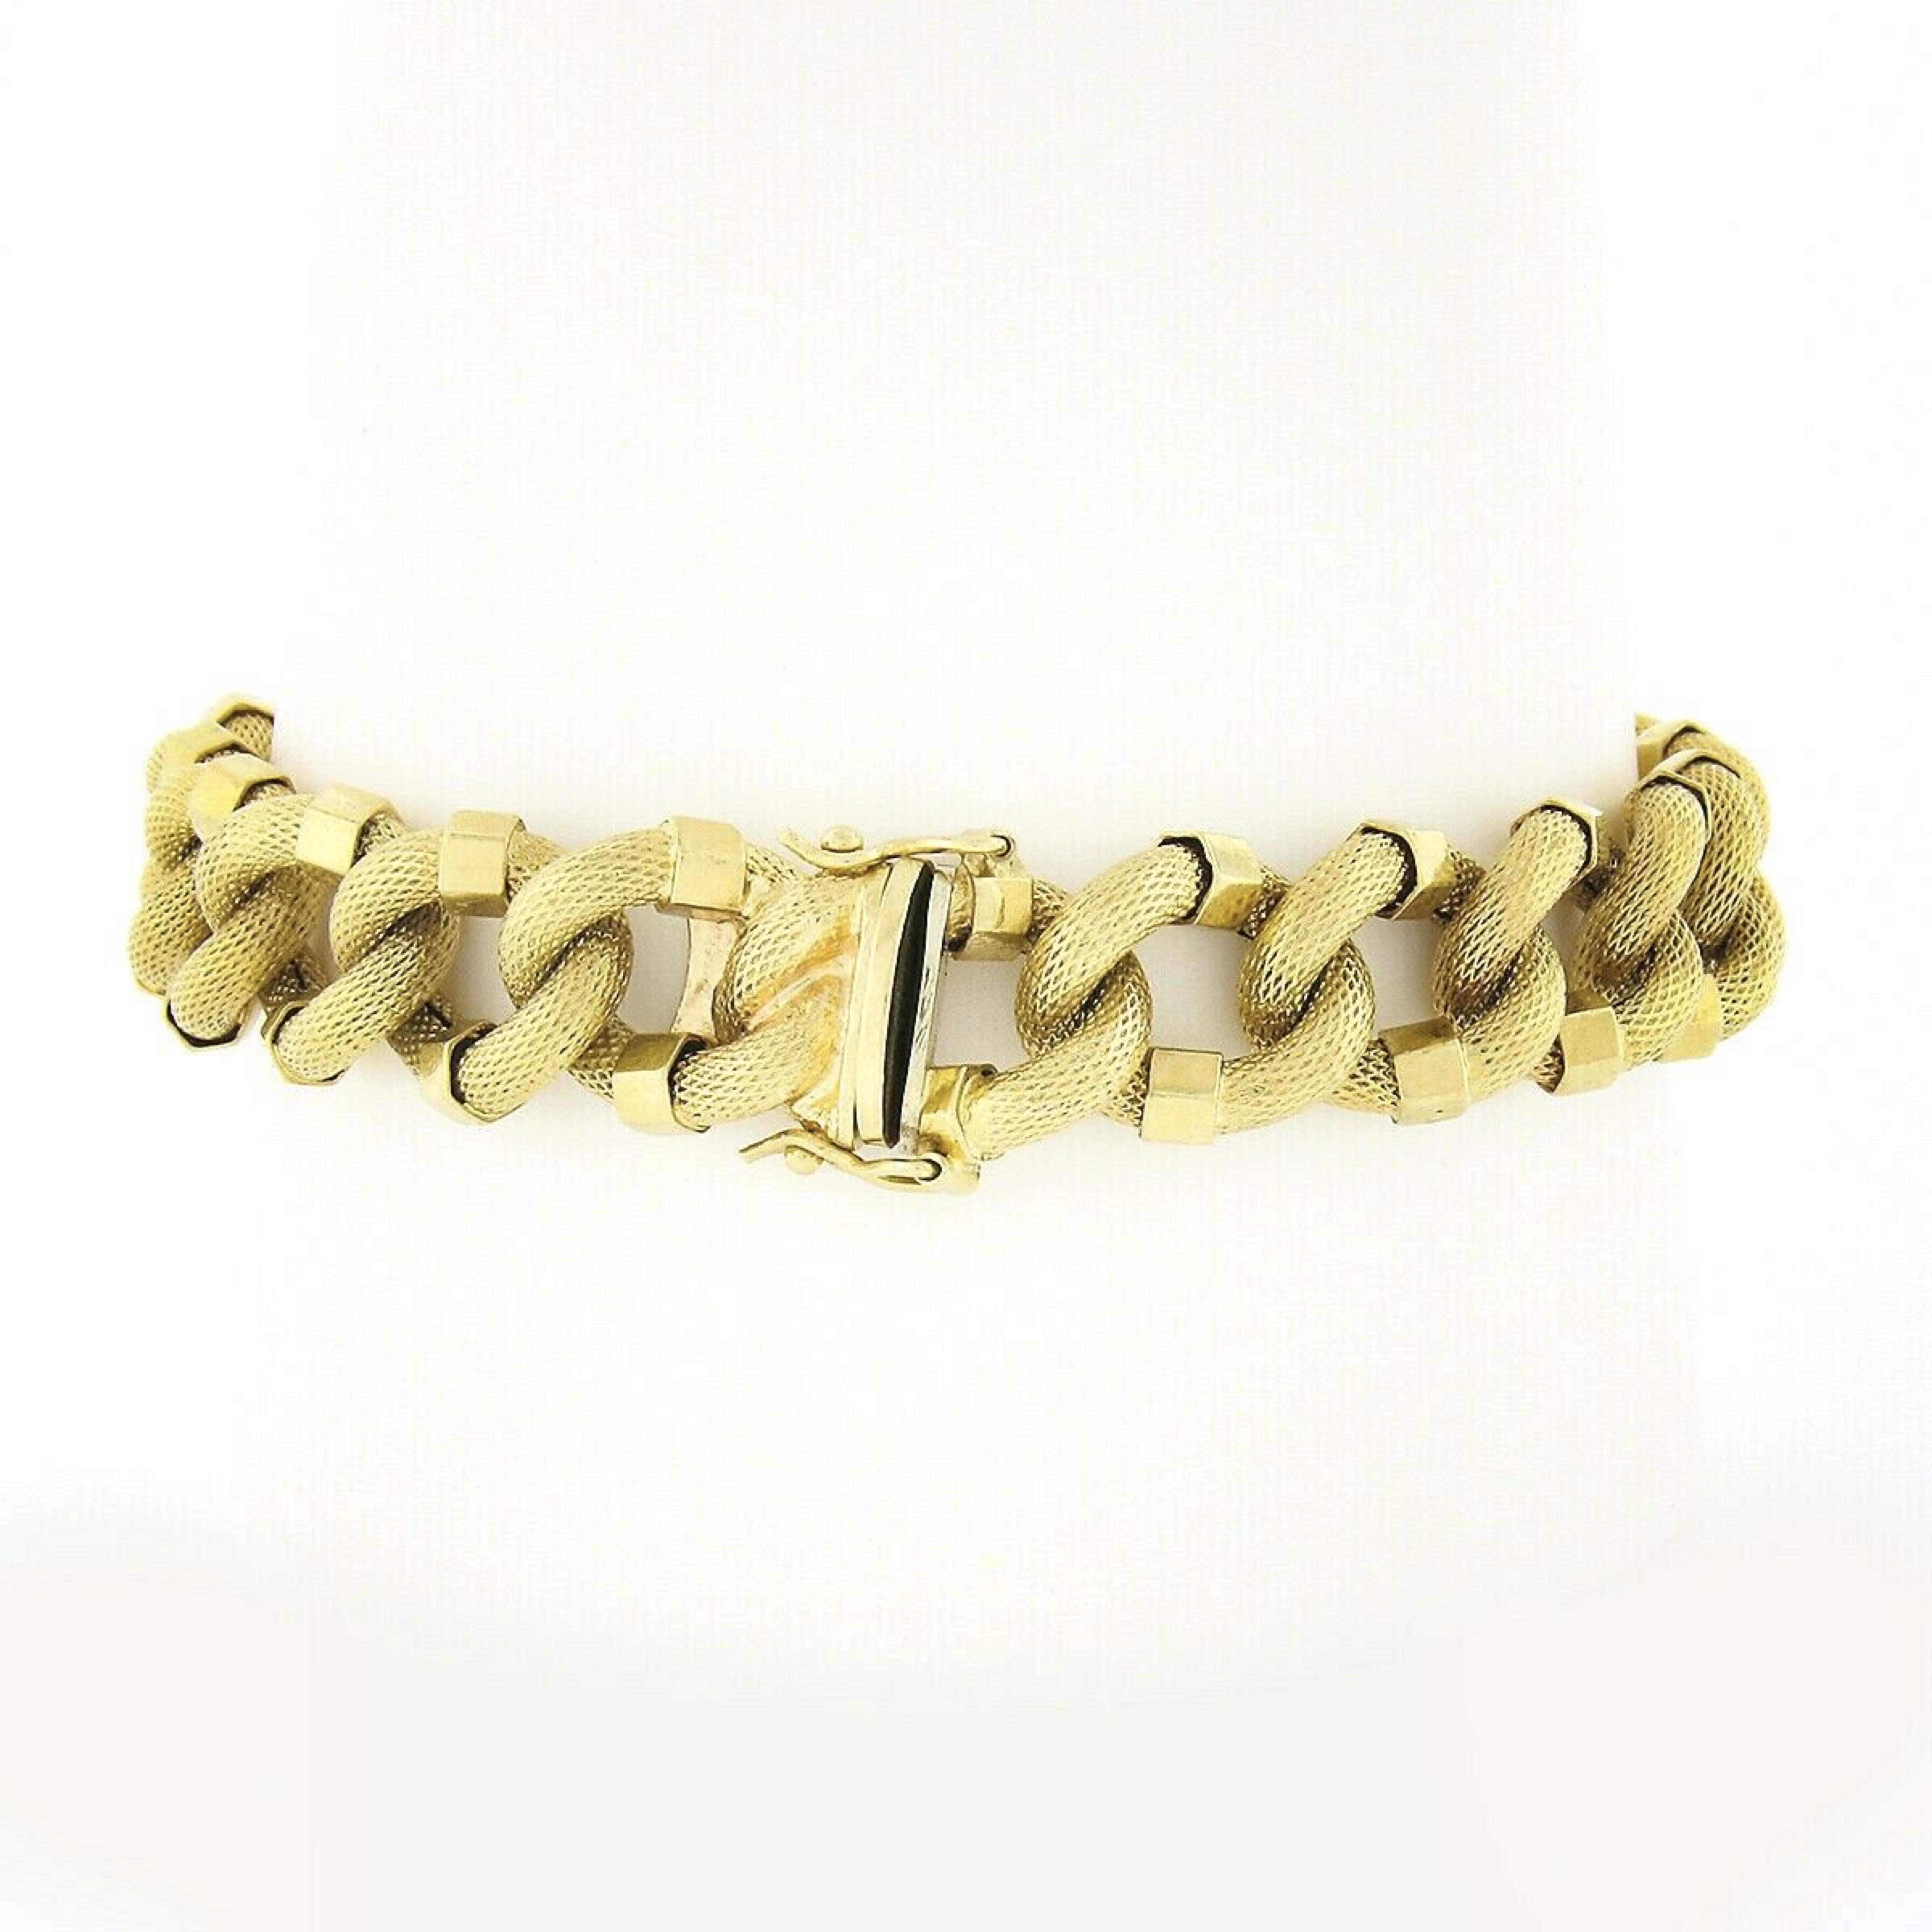 You are looking at a gorgeous bracelet that was crafted in Italy from solid 18k yellow gold featuring well assembled fancy curb links throughout. The links have a wonderful textured finish adorned with a faceted design at both sides of each link